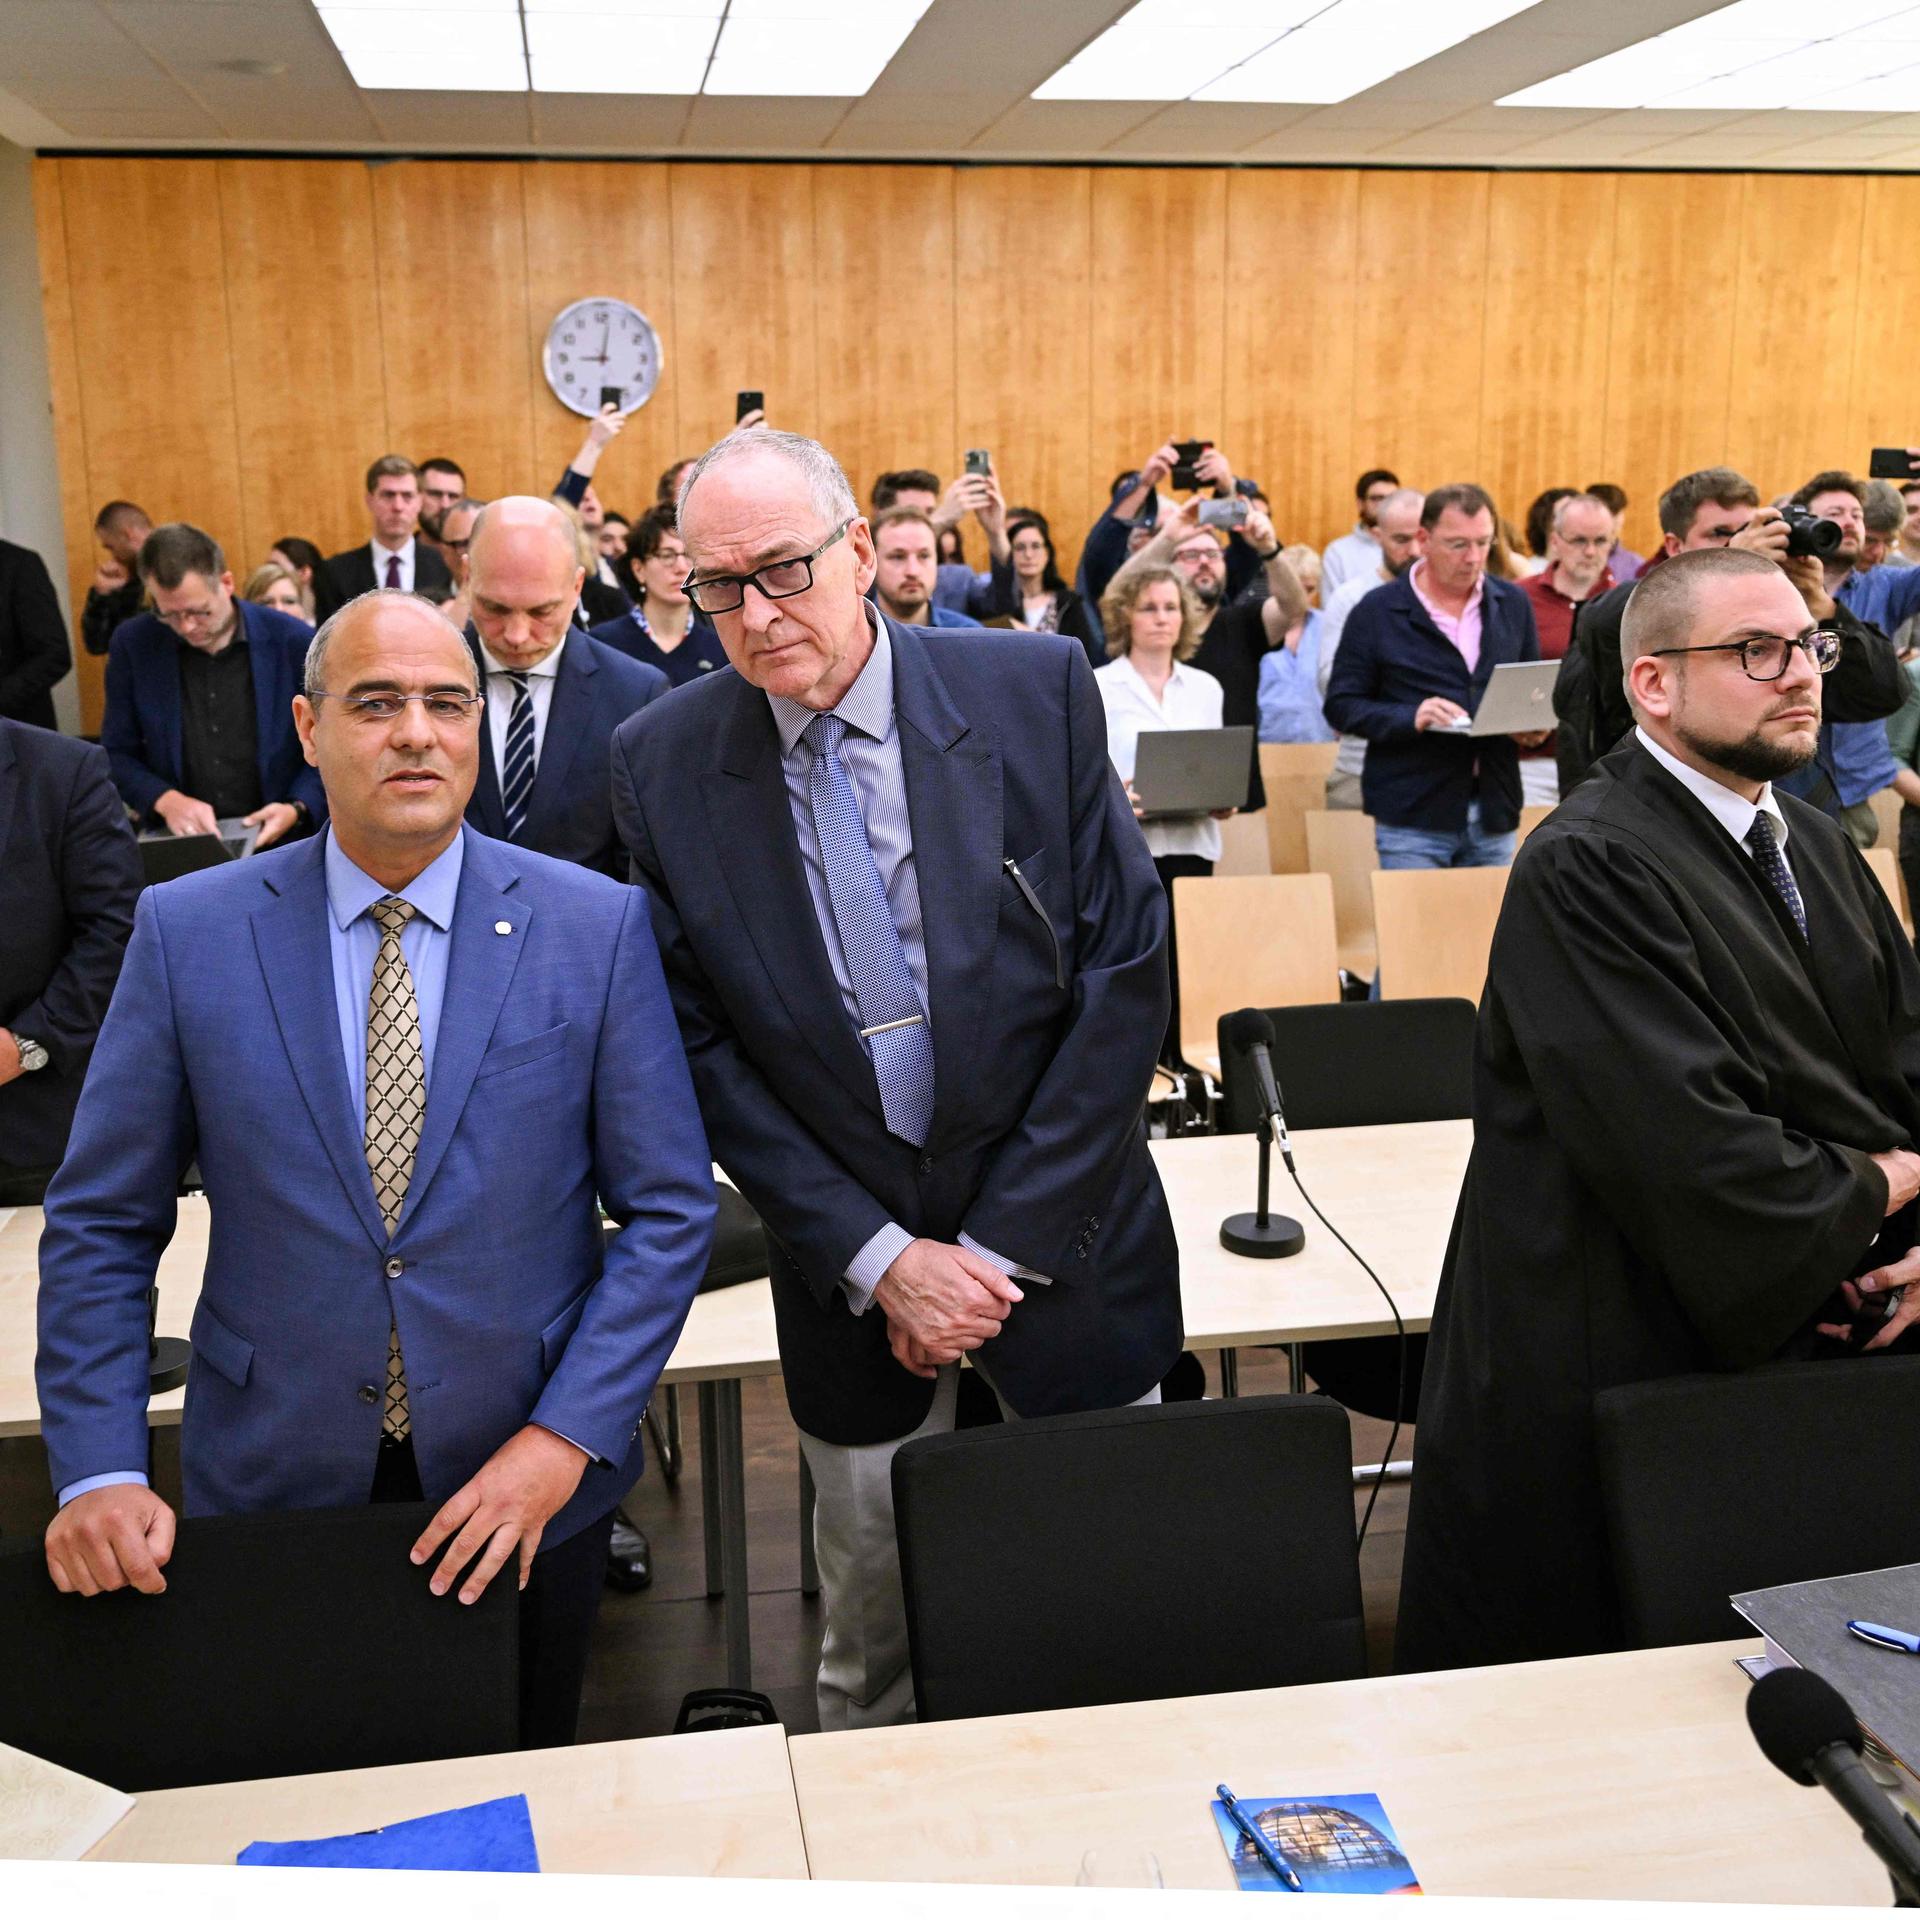 Peter Boehringer (L) and Roman Reusch (C), both members of Germany's far-right Alternative for Germany (AfD) party, and their lawywer Christian Conrad (R) wait for the verdict of the trial at the Higher Administrative Court in Muenster, western Germany on May 13, 2024.